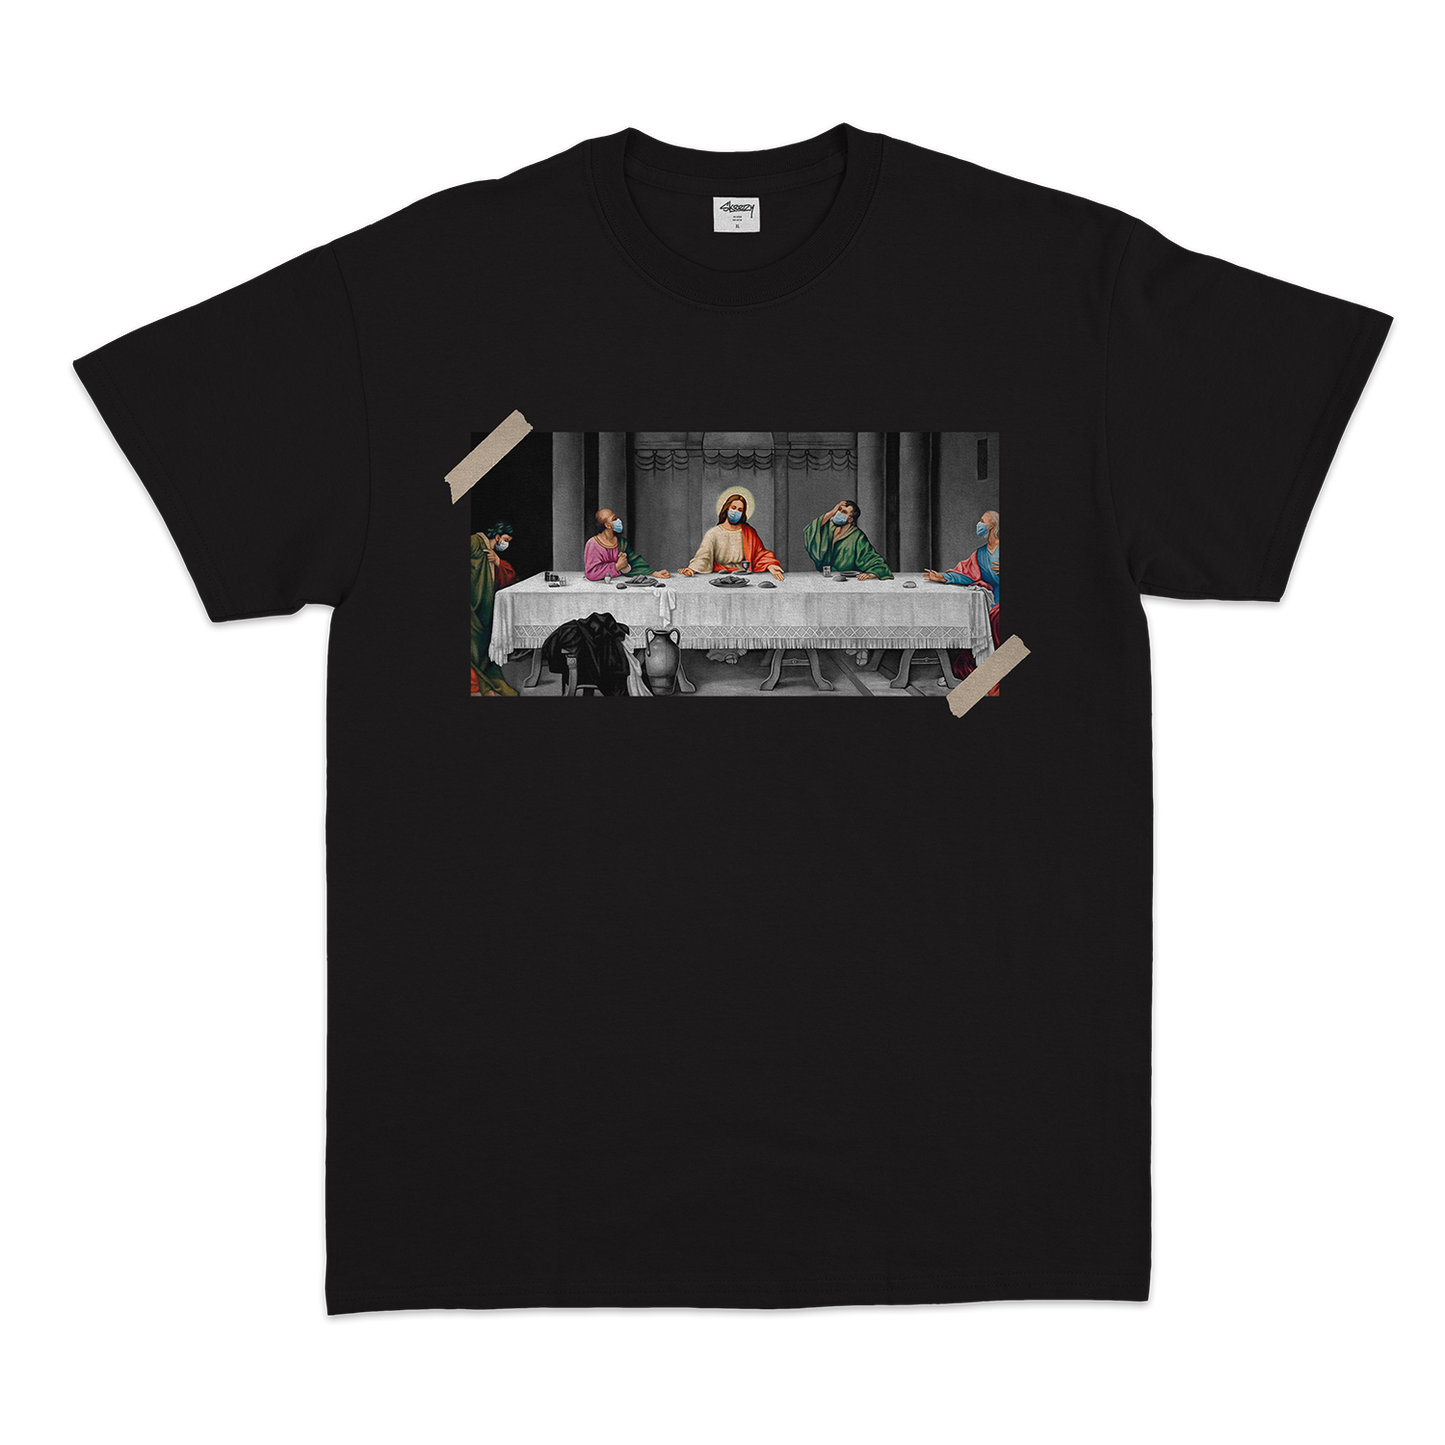 The Last Supper tee